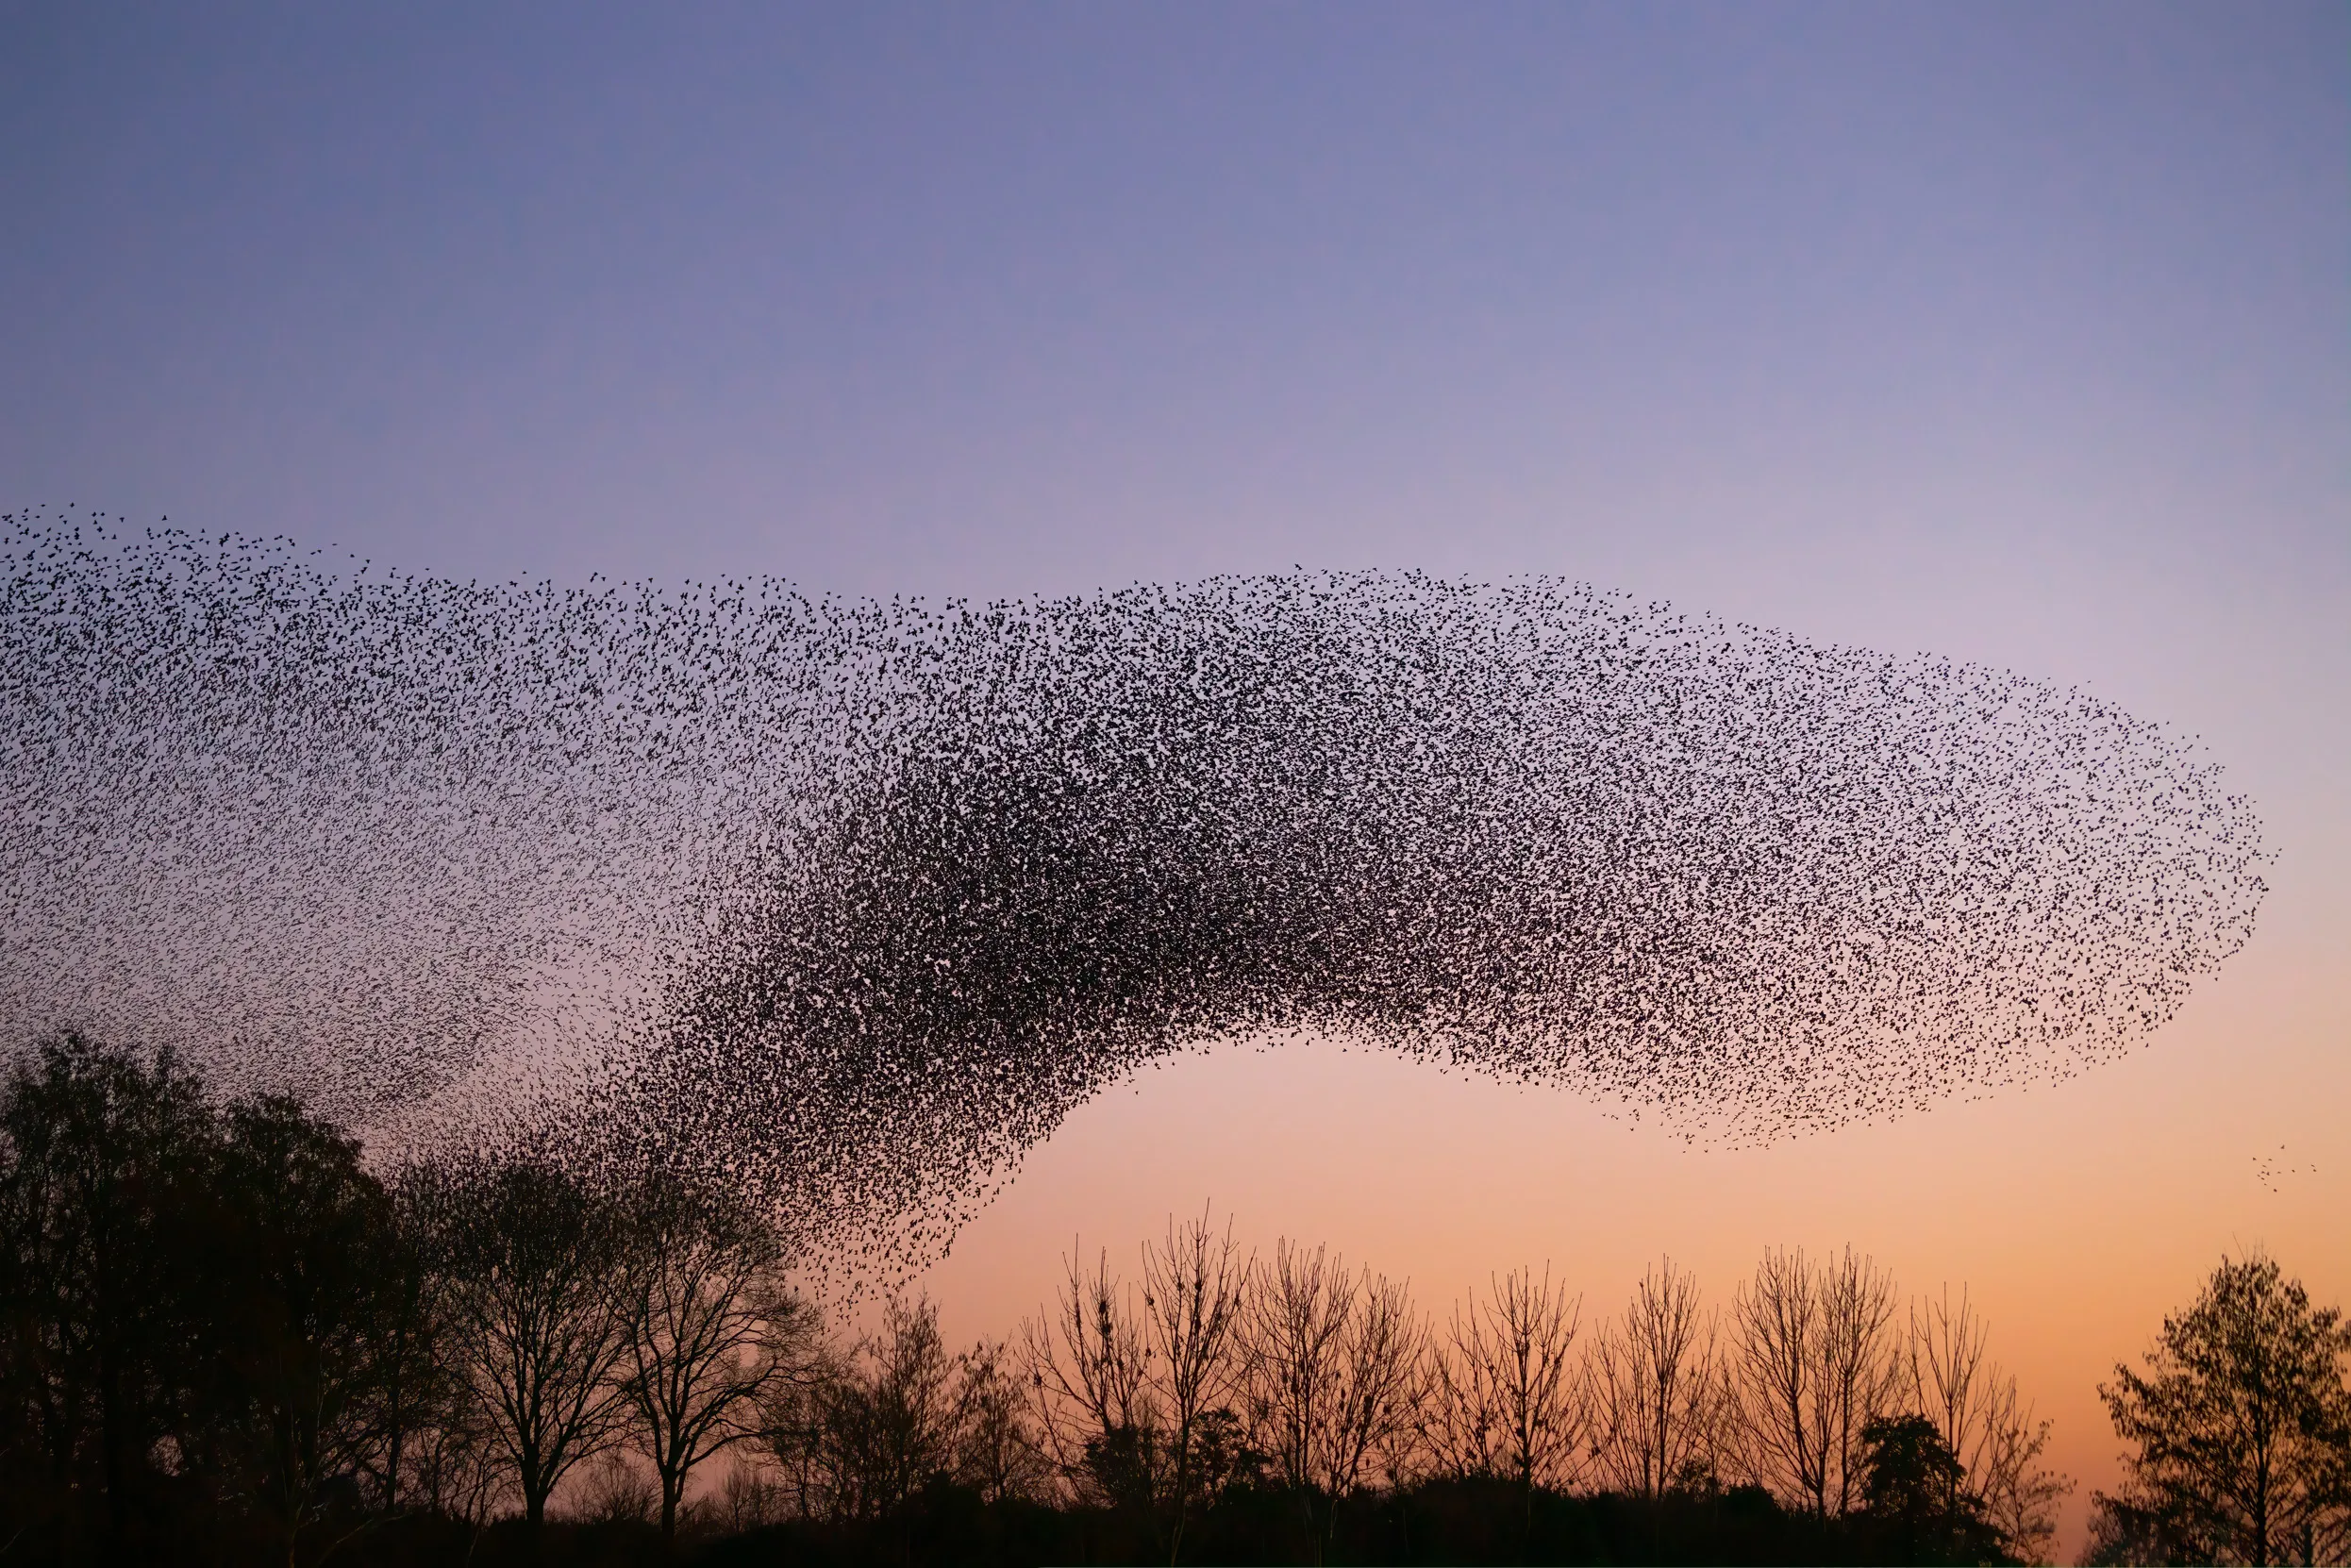 Starling murmuration flying overhead in a pink and orange sunset sky.